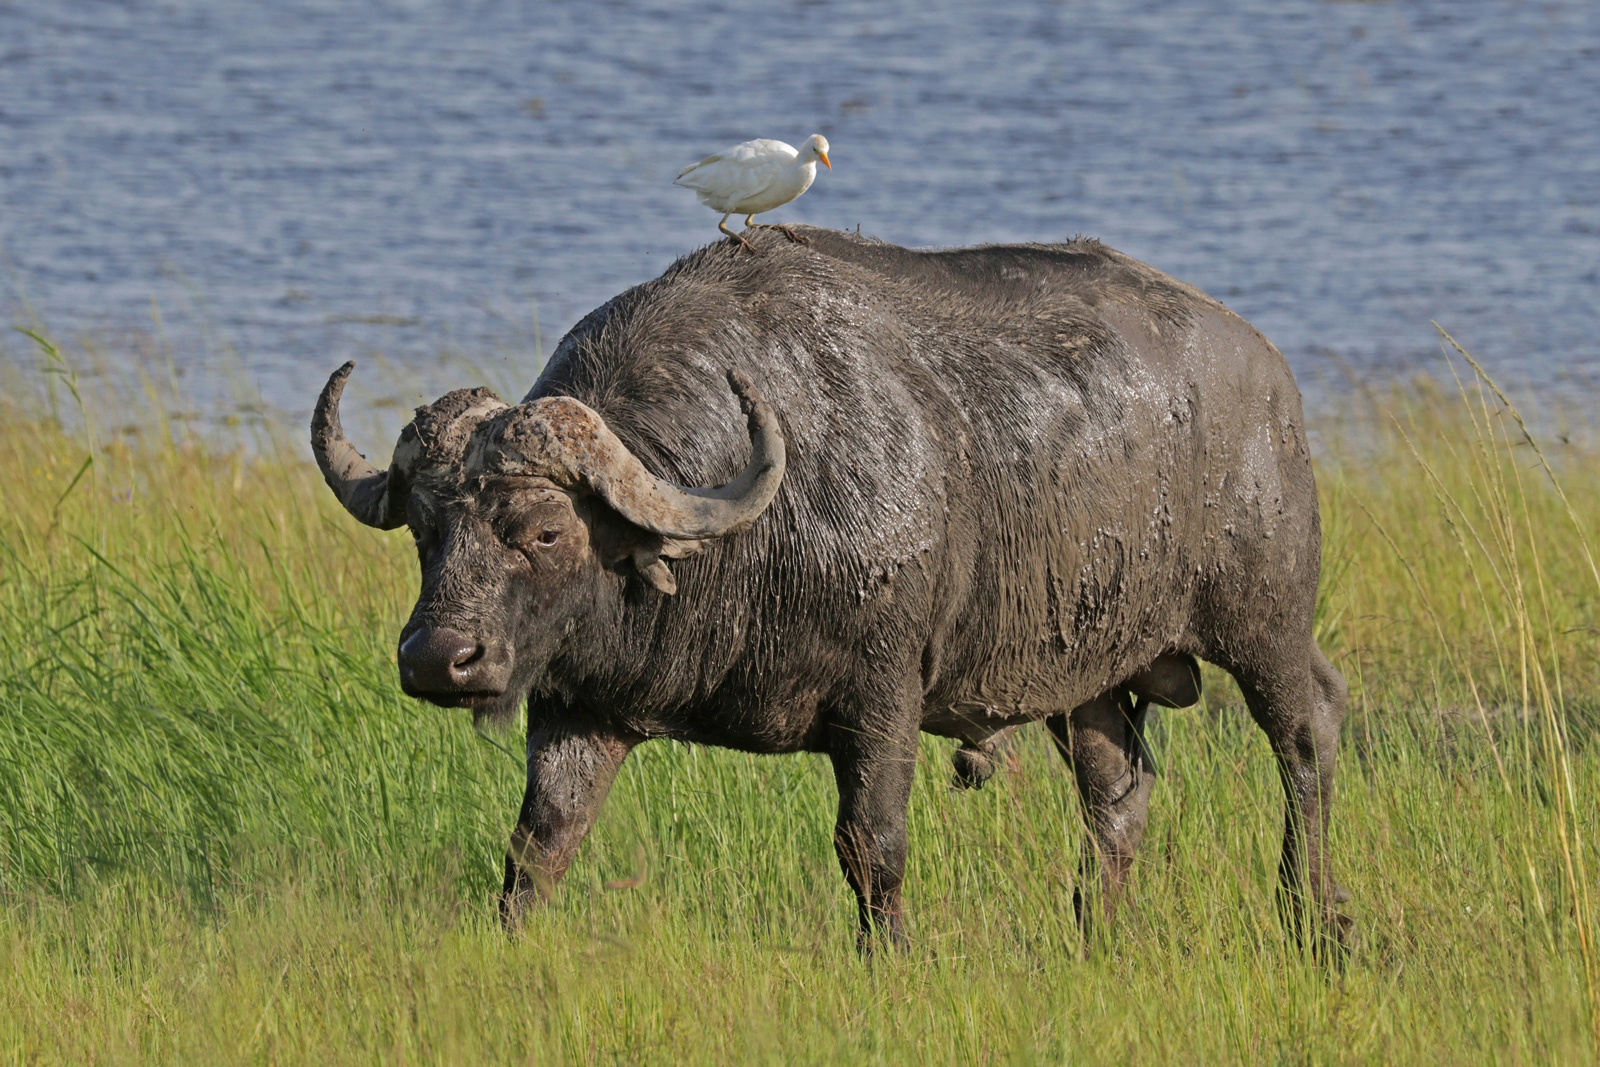 Cape Buffalo. Photo credit: Charles J. Sharp. https://commons.wikimedia.org/wiki/File:African_buffalo_(Syncerus_caffer_caffer)_male_with_cattle_egret.jpg